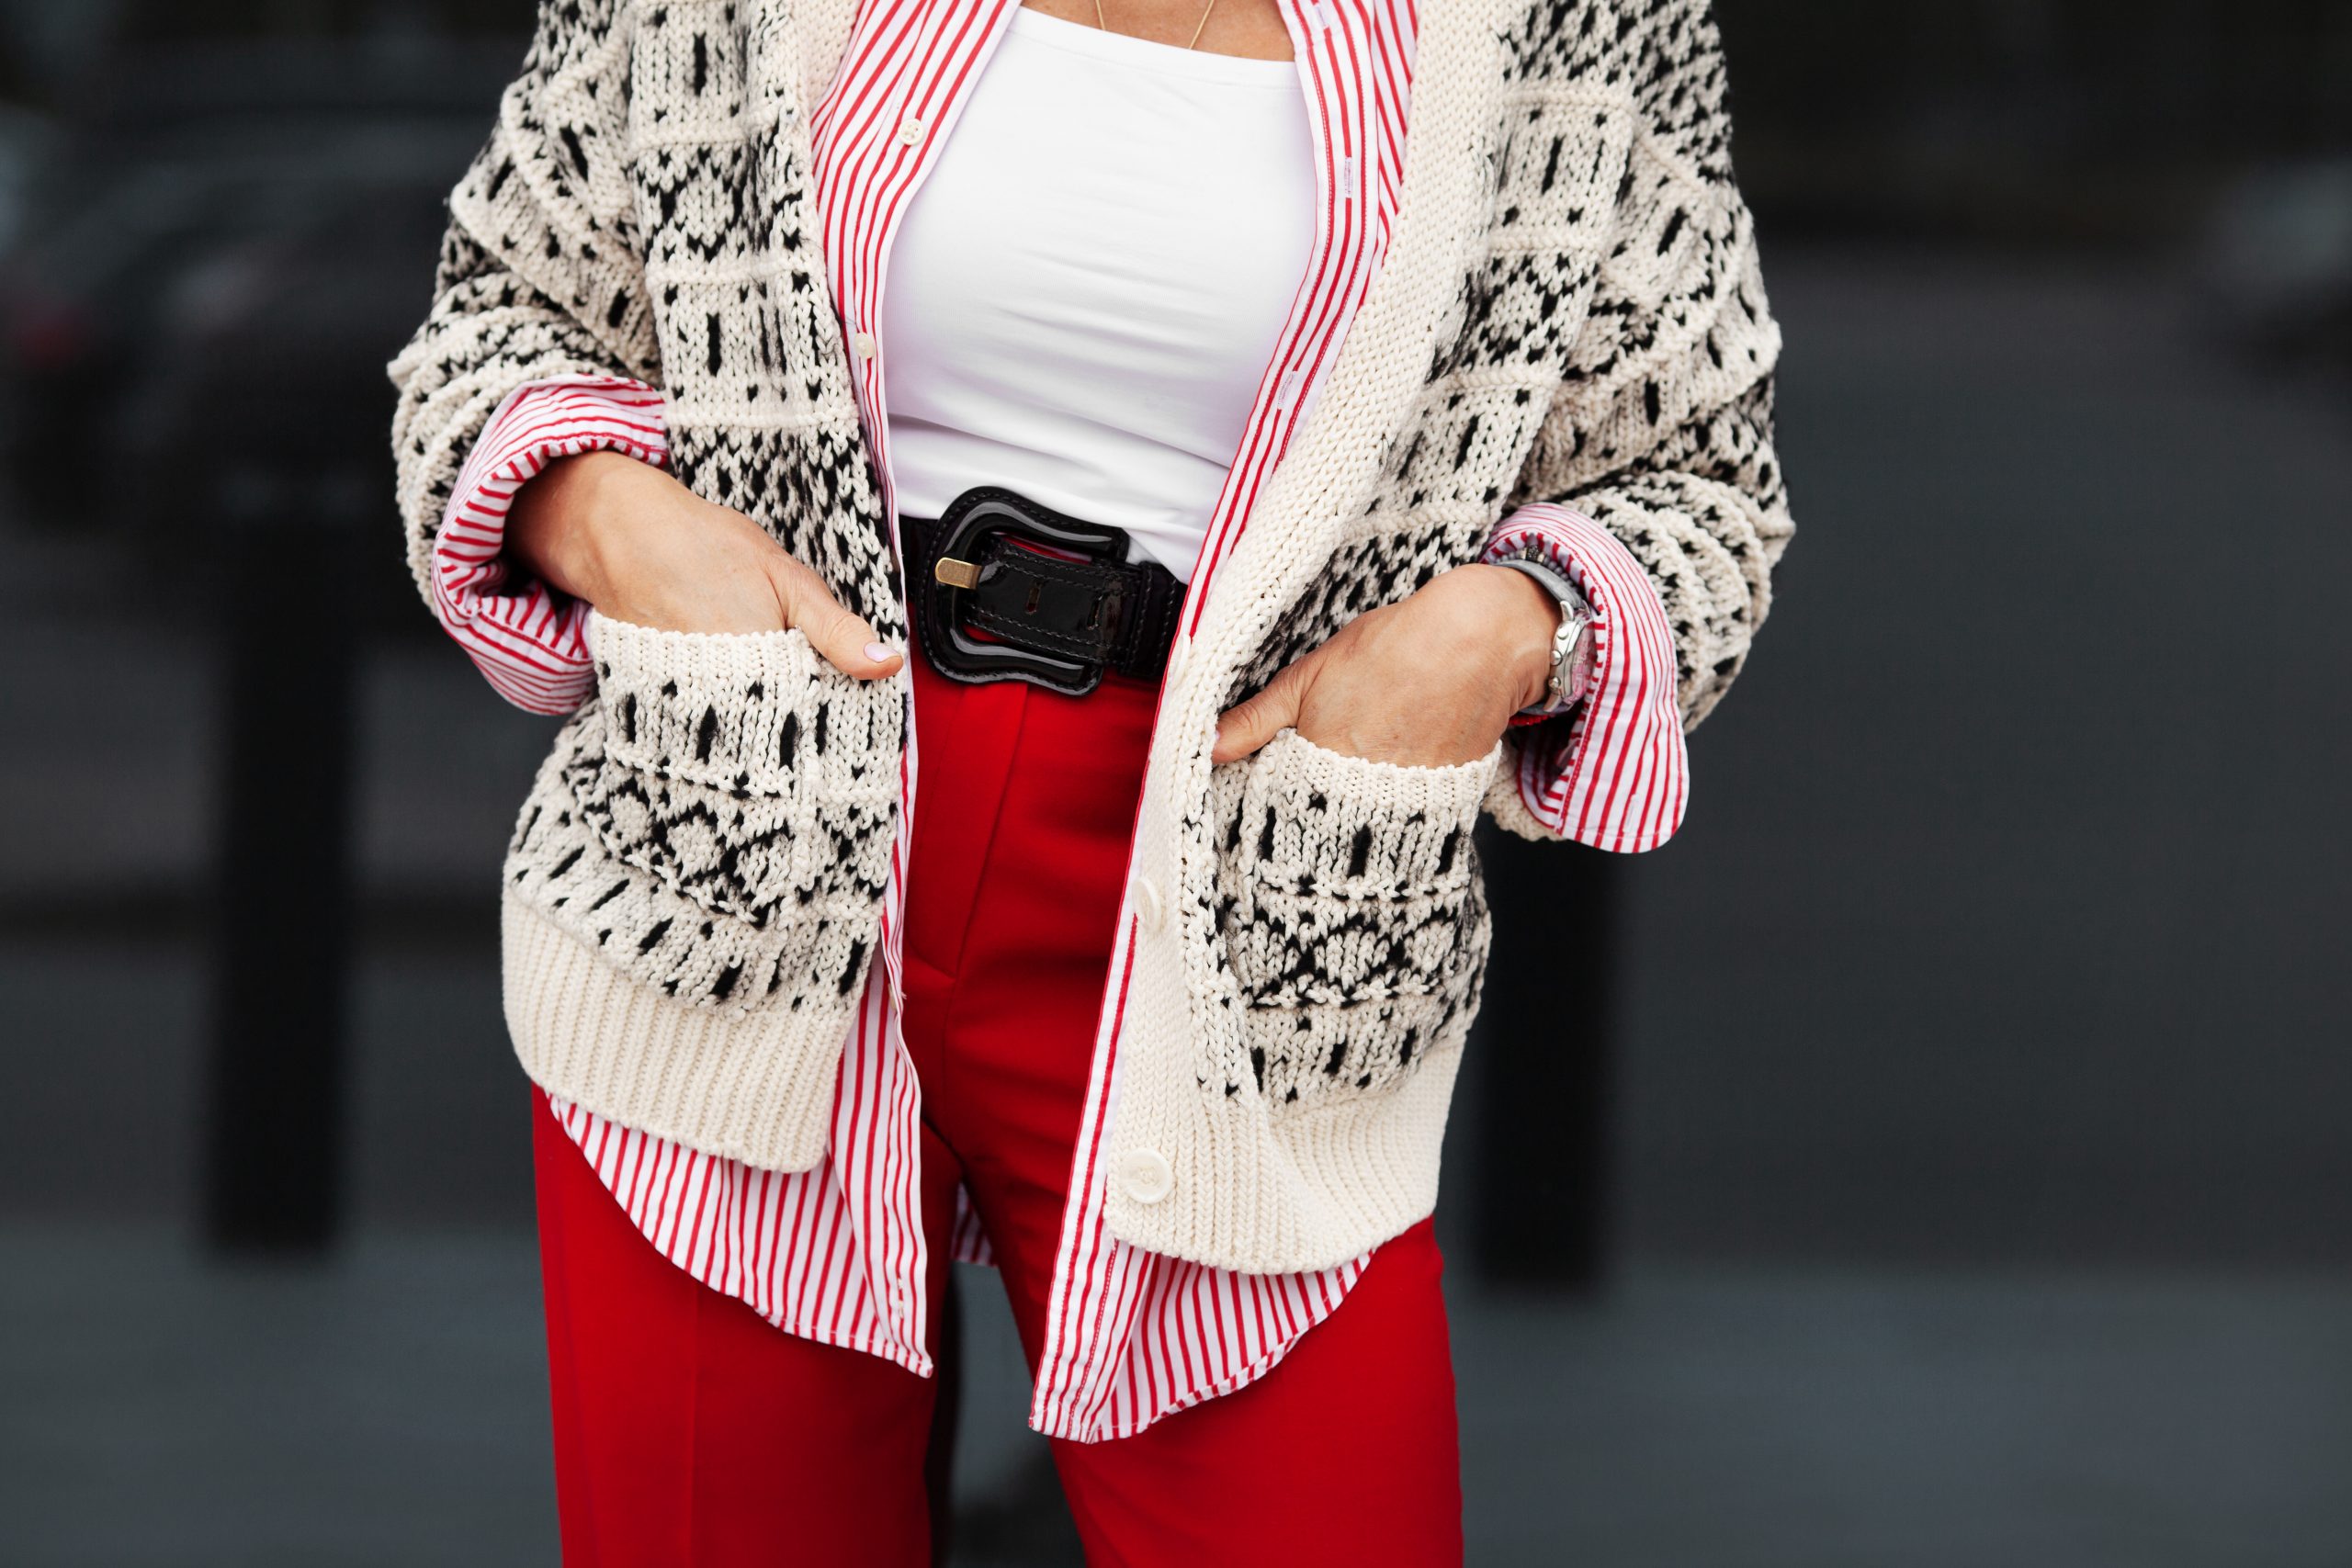 Street style details. Close up hands in pockets of stylish woman. Fashion blogger wearing sweater, shirt, belt and pants. Autumn or spring fashion trend